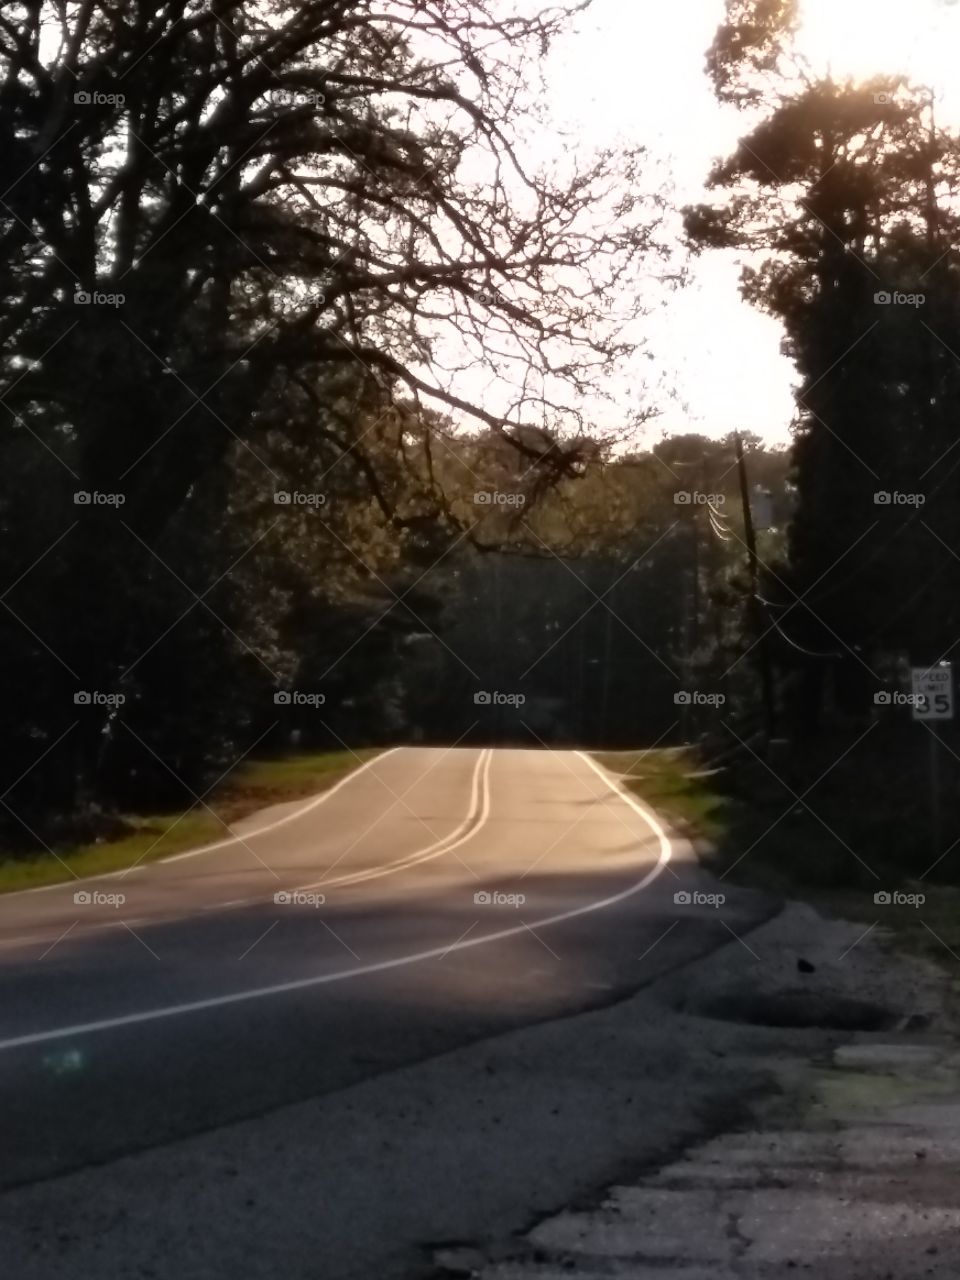 Dusk sunshine on an untraveled road in a small town in the foothills of North Carolina.